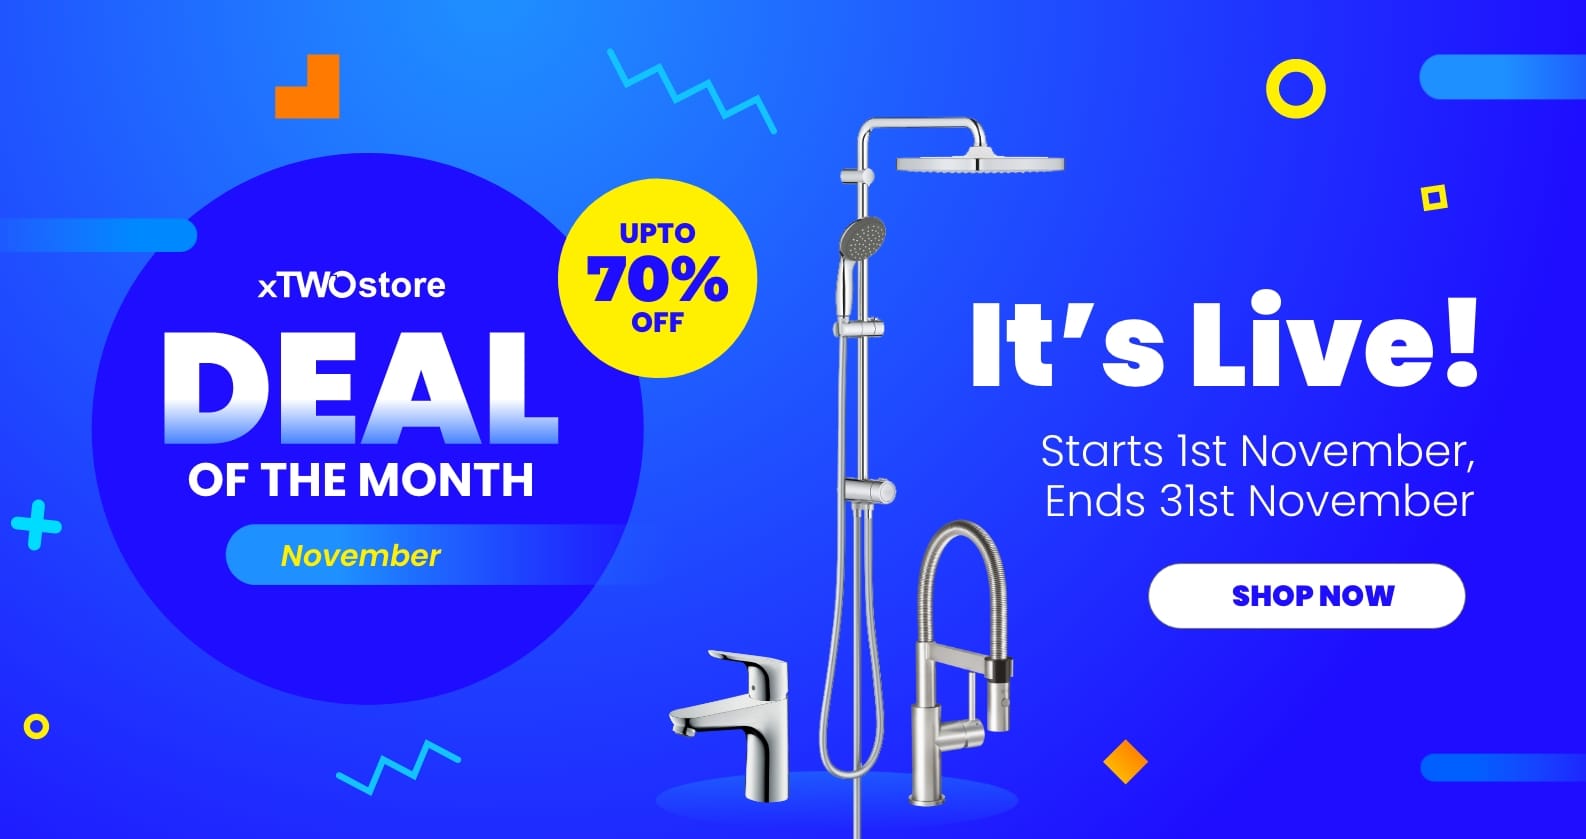 Deal Of The Month at xTWOstore